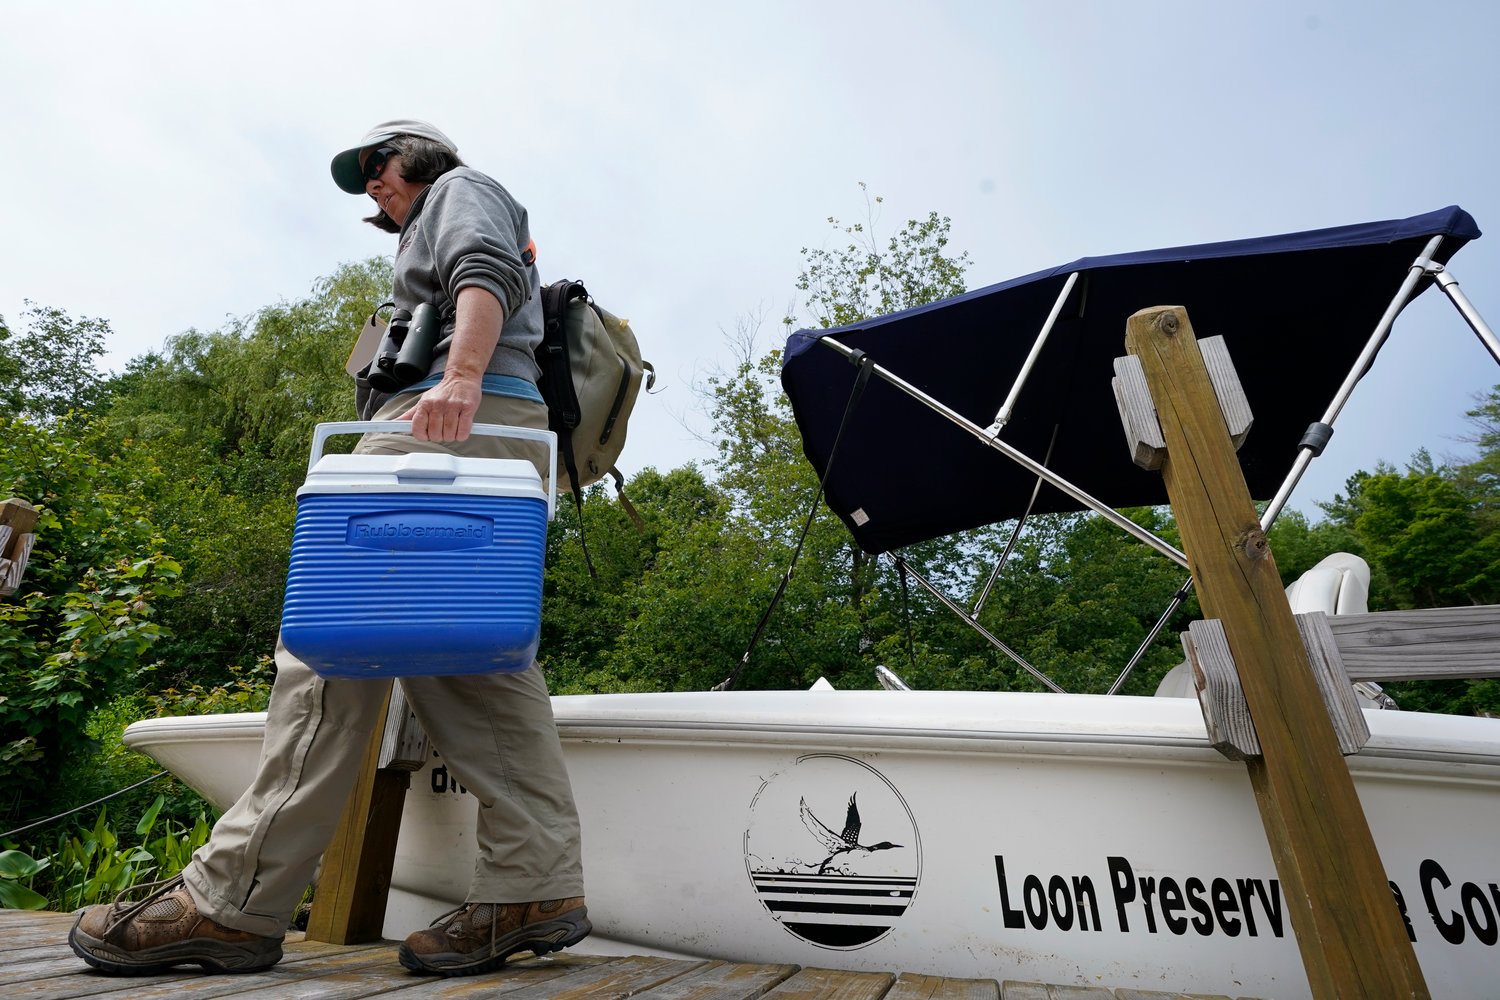 Biologist Tiffany Grade carries a cooler containing a non-viable loon egg collected from Squam Lake, Friday, June 25, 2021, in Holderness, N.H. Grade is studying the impact PCB's are having on loons, and will examine the egg for possible PCB contamination. Researchers in New Hampshire have long struggled to understand why loon numbers have stagnated on the lake, despite a robust effort to protect them. (AP Photo/Elise Amendola)